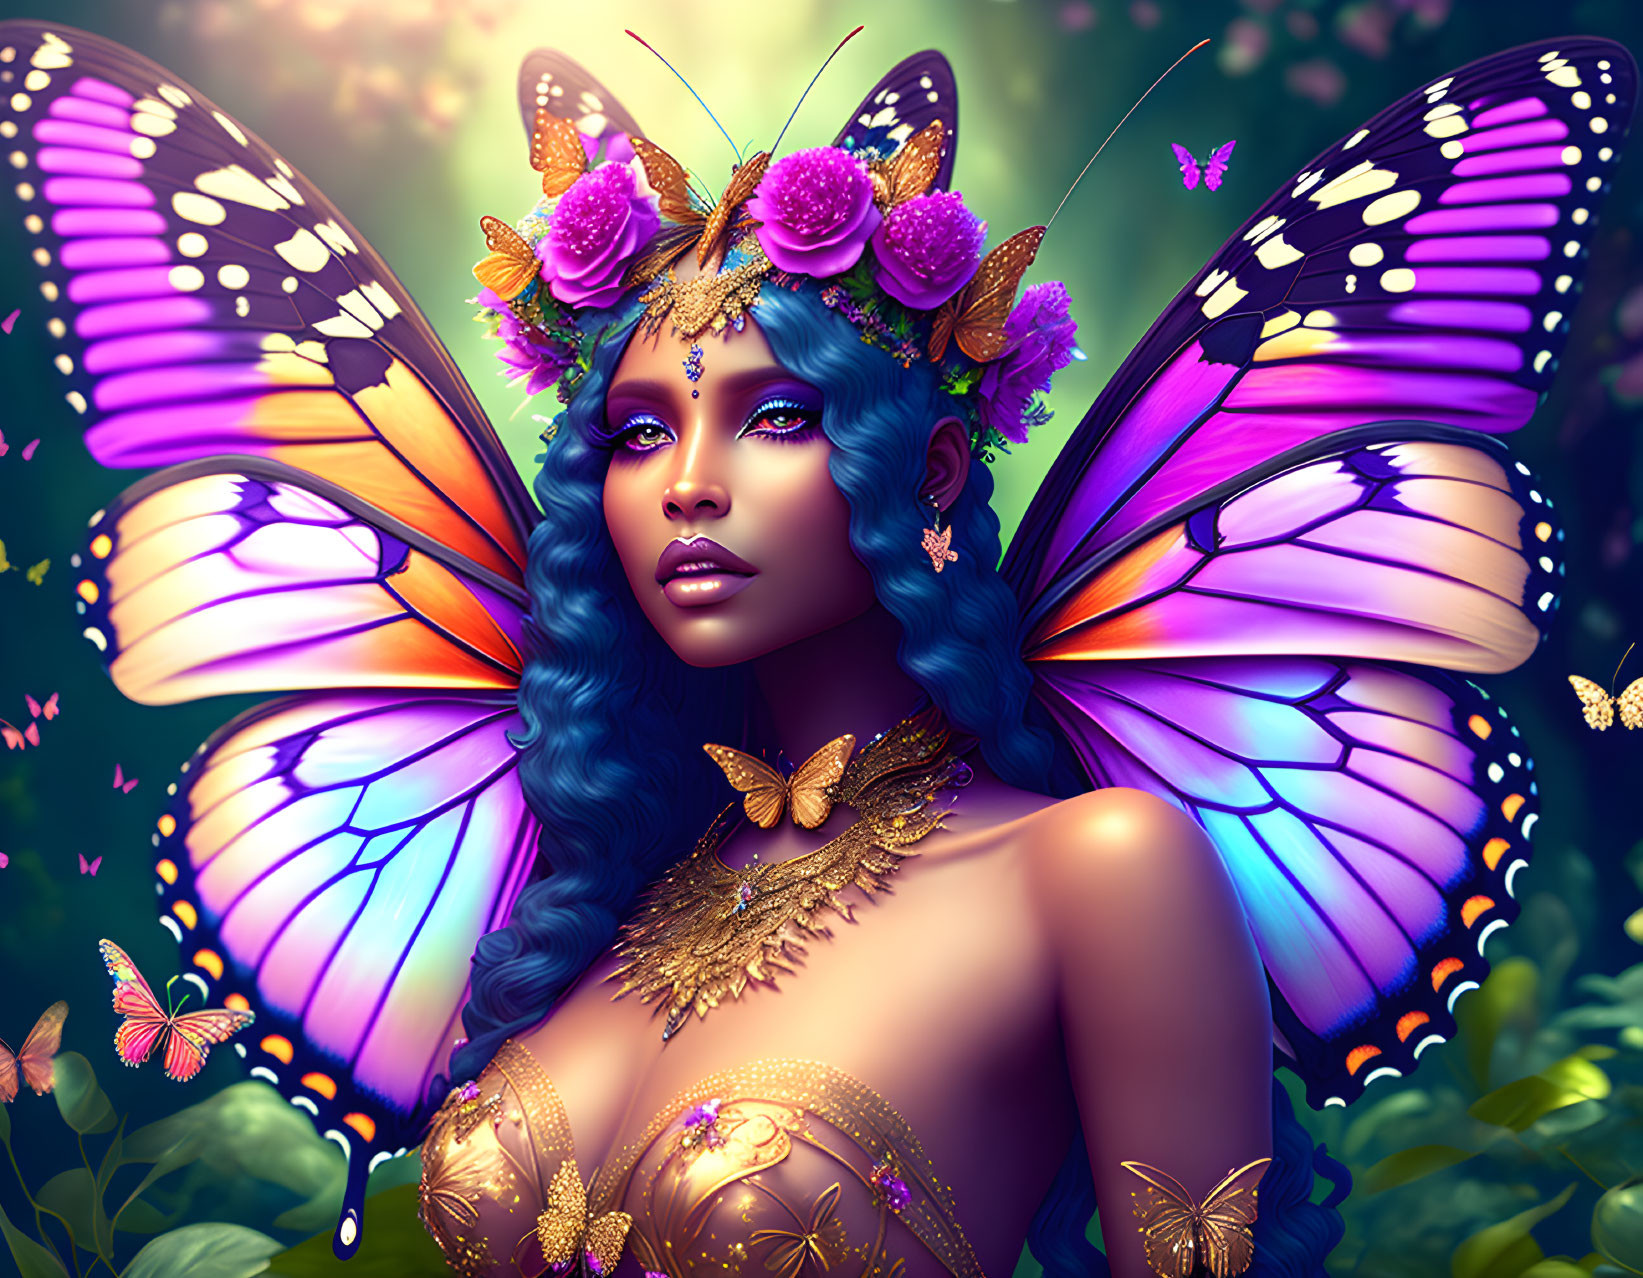 Digital artwork: Woman with butterfly wings, blue skin, and floral accessories in magical forest.